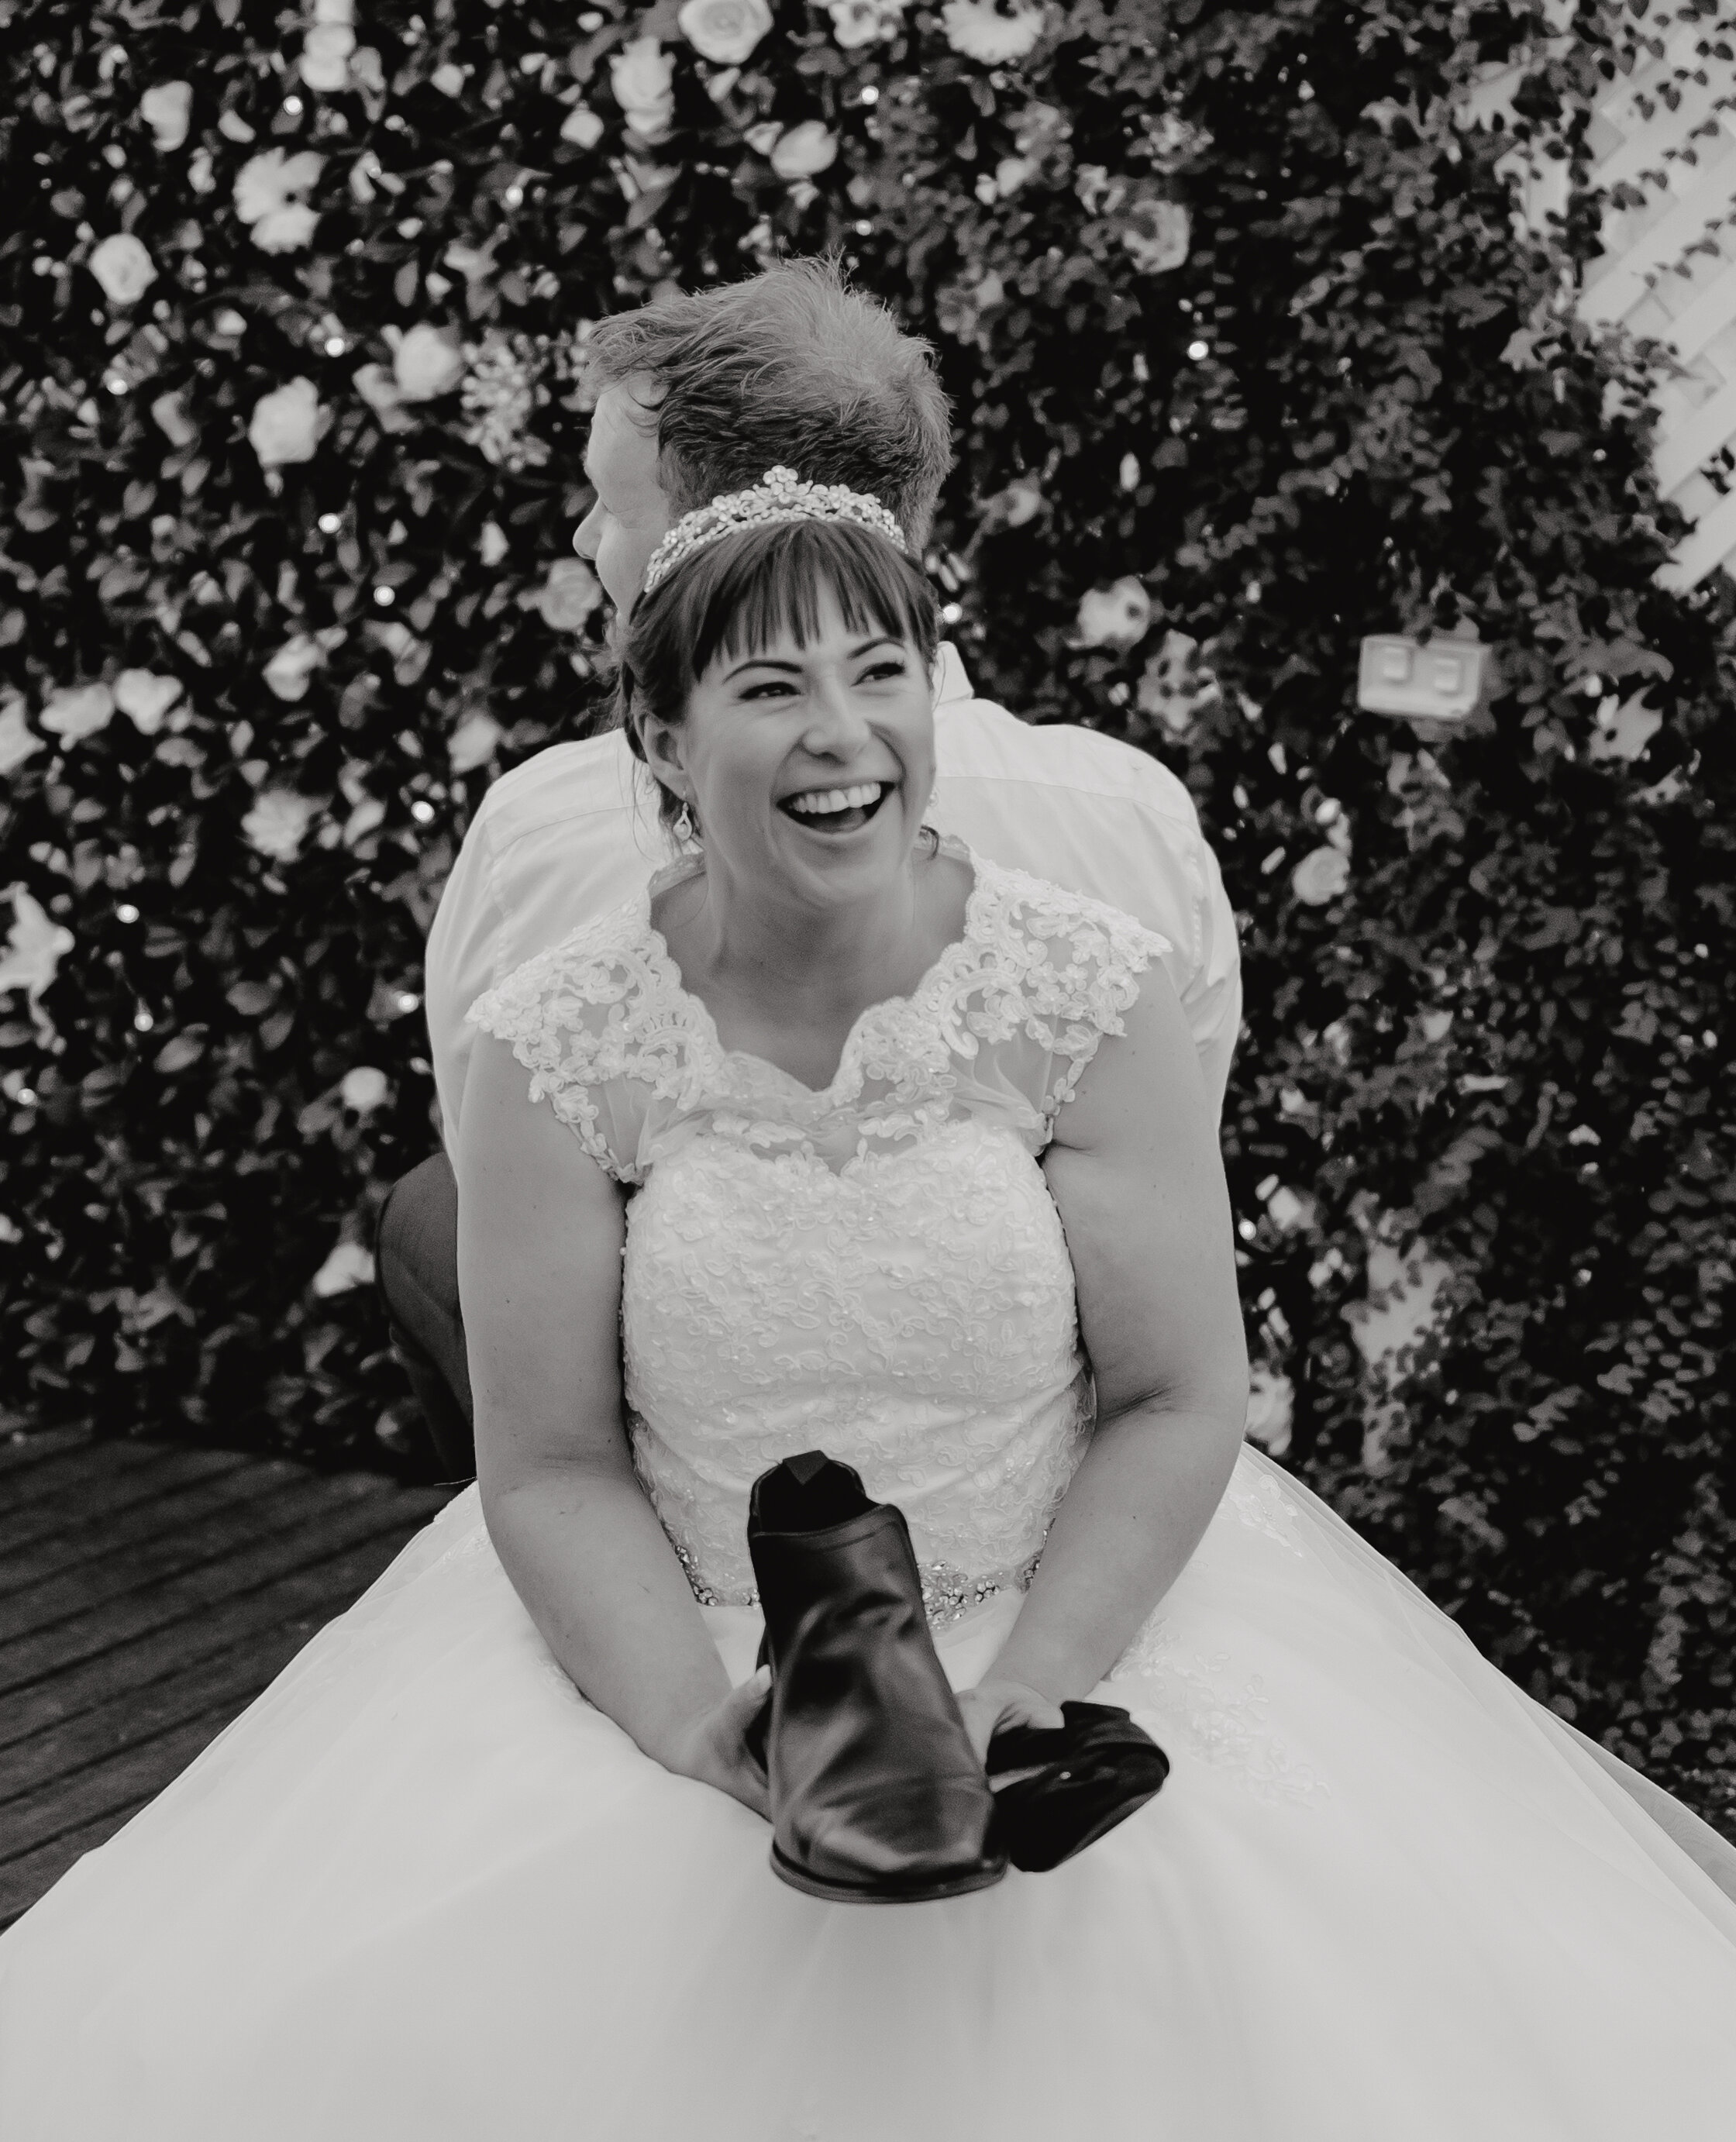 Bride laughing during 'The Shoe Game' at wedding reception